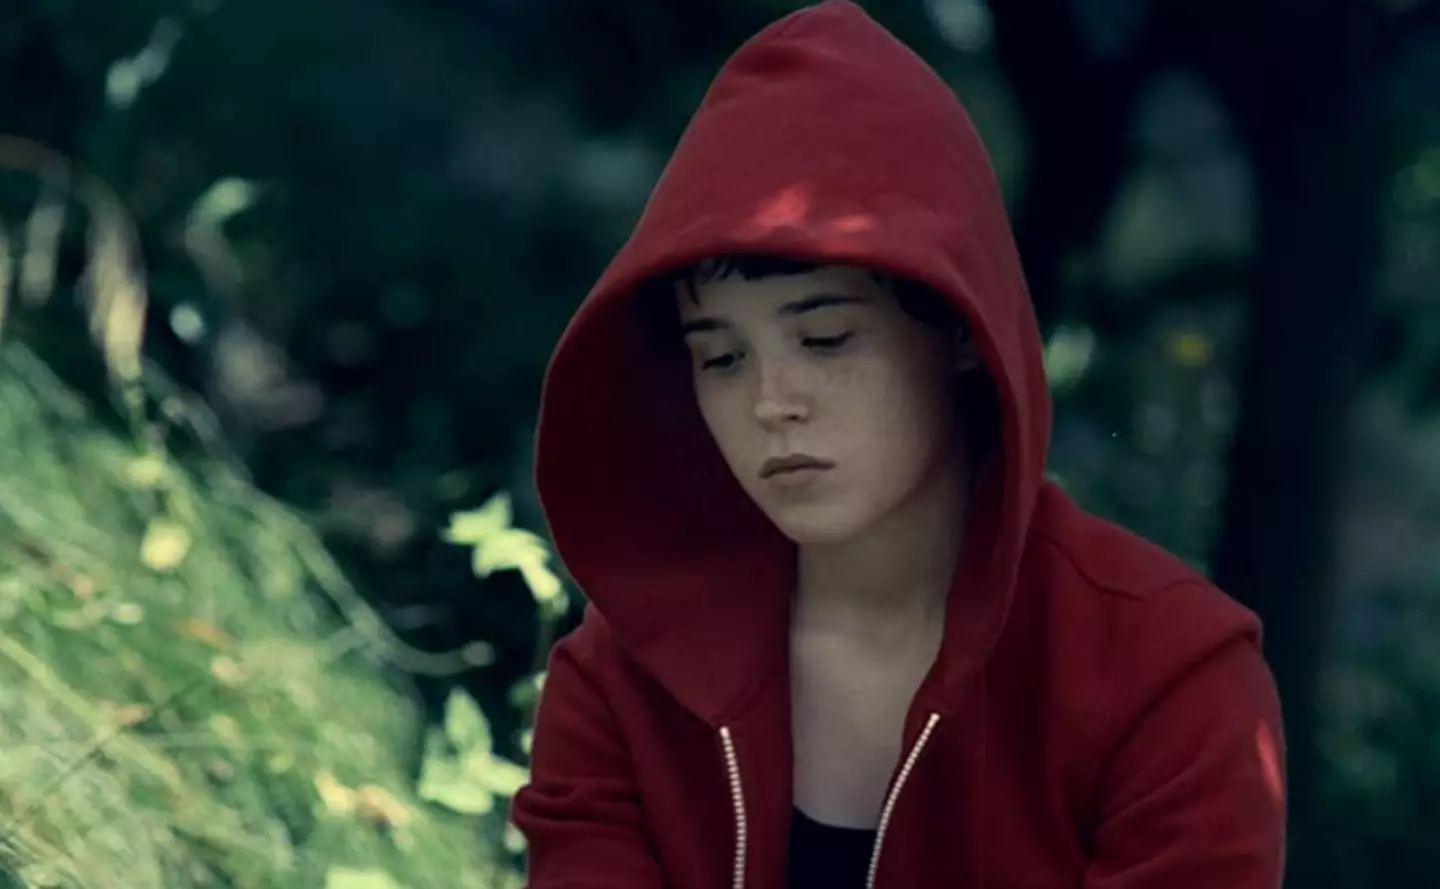 Elliot Page played the role of Hayley Stark in 'Hard Candy'.